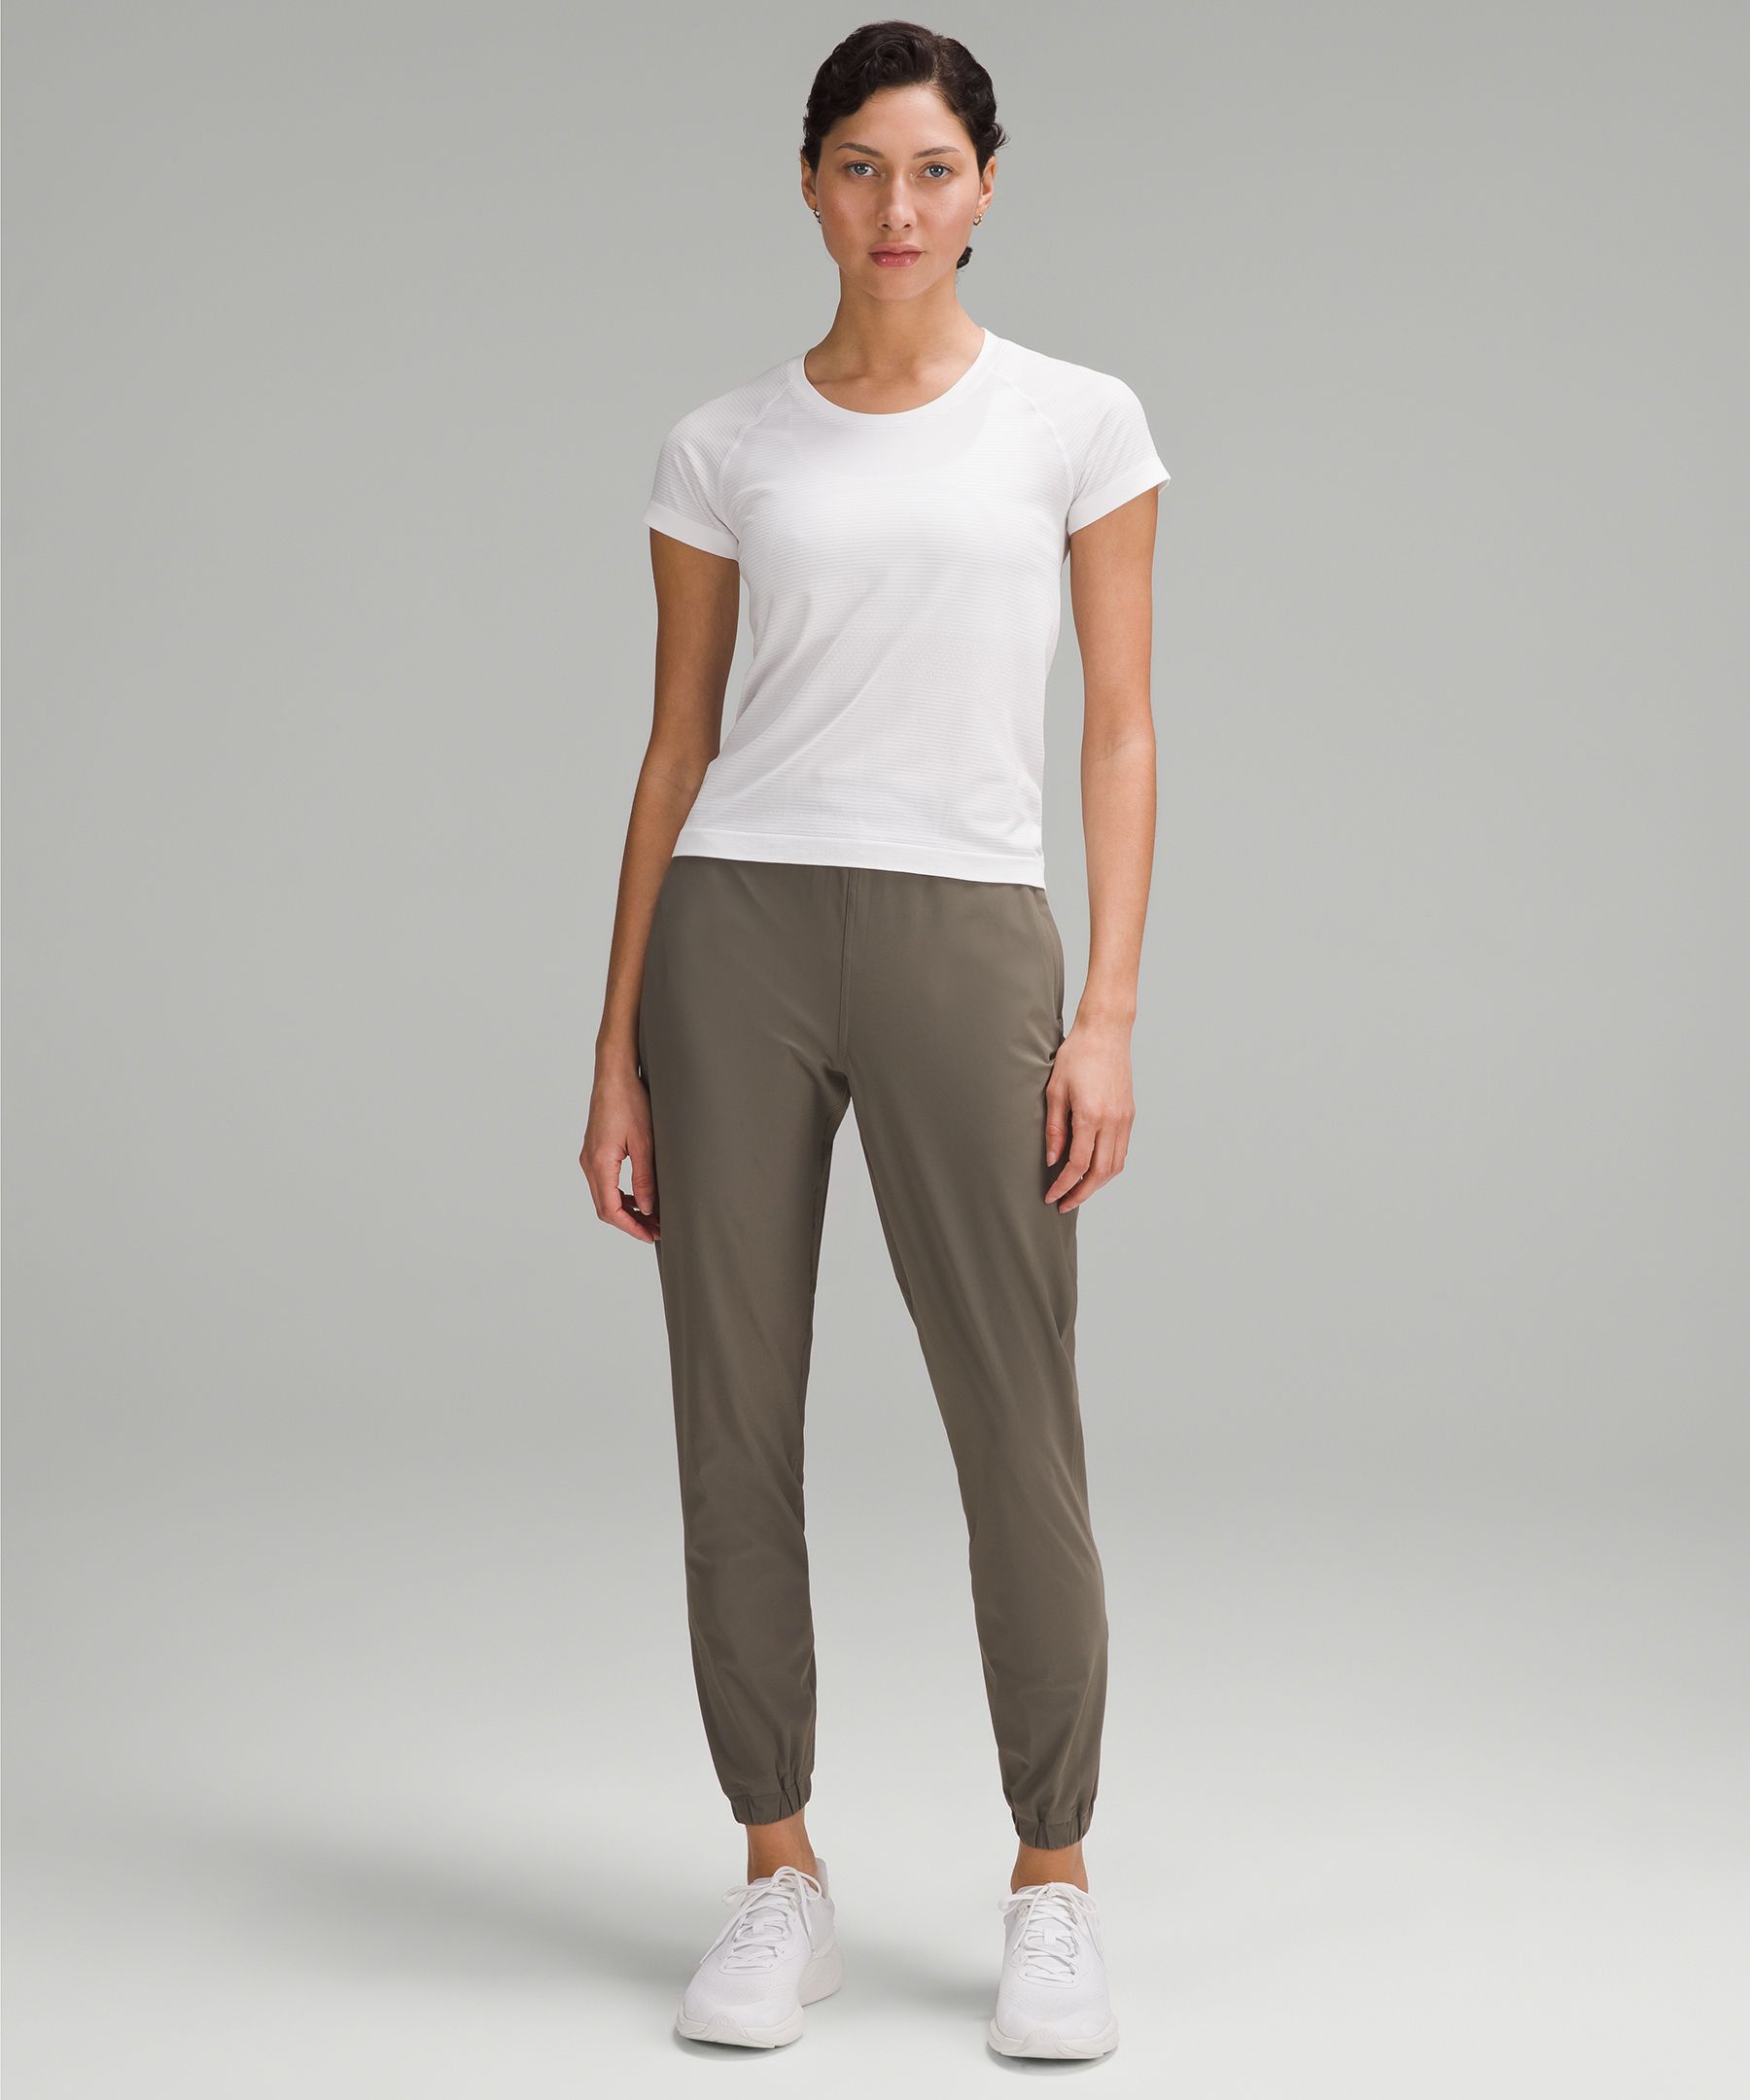 LULULEMON ADAPTED STATE JOGGER WOMEN'S 4  Maxx Liquidation Marketplace &  Online Auctions